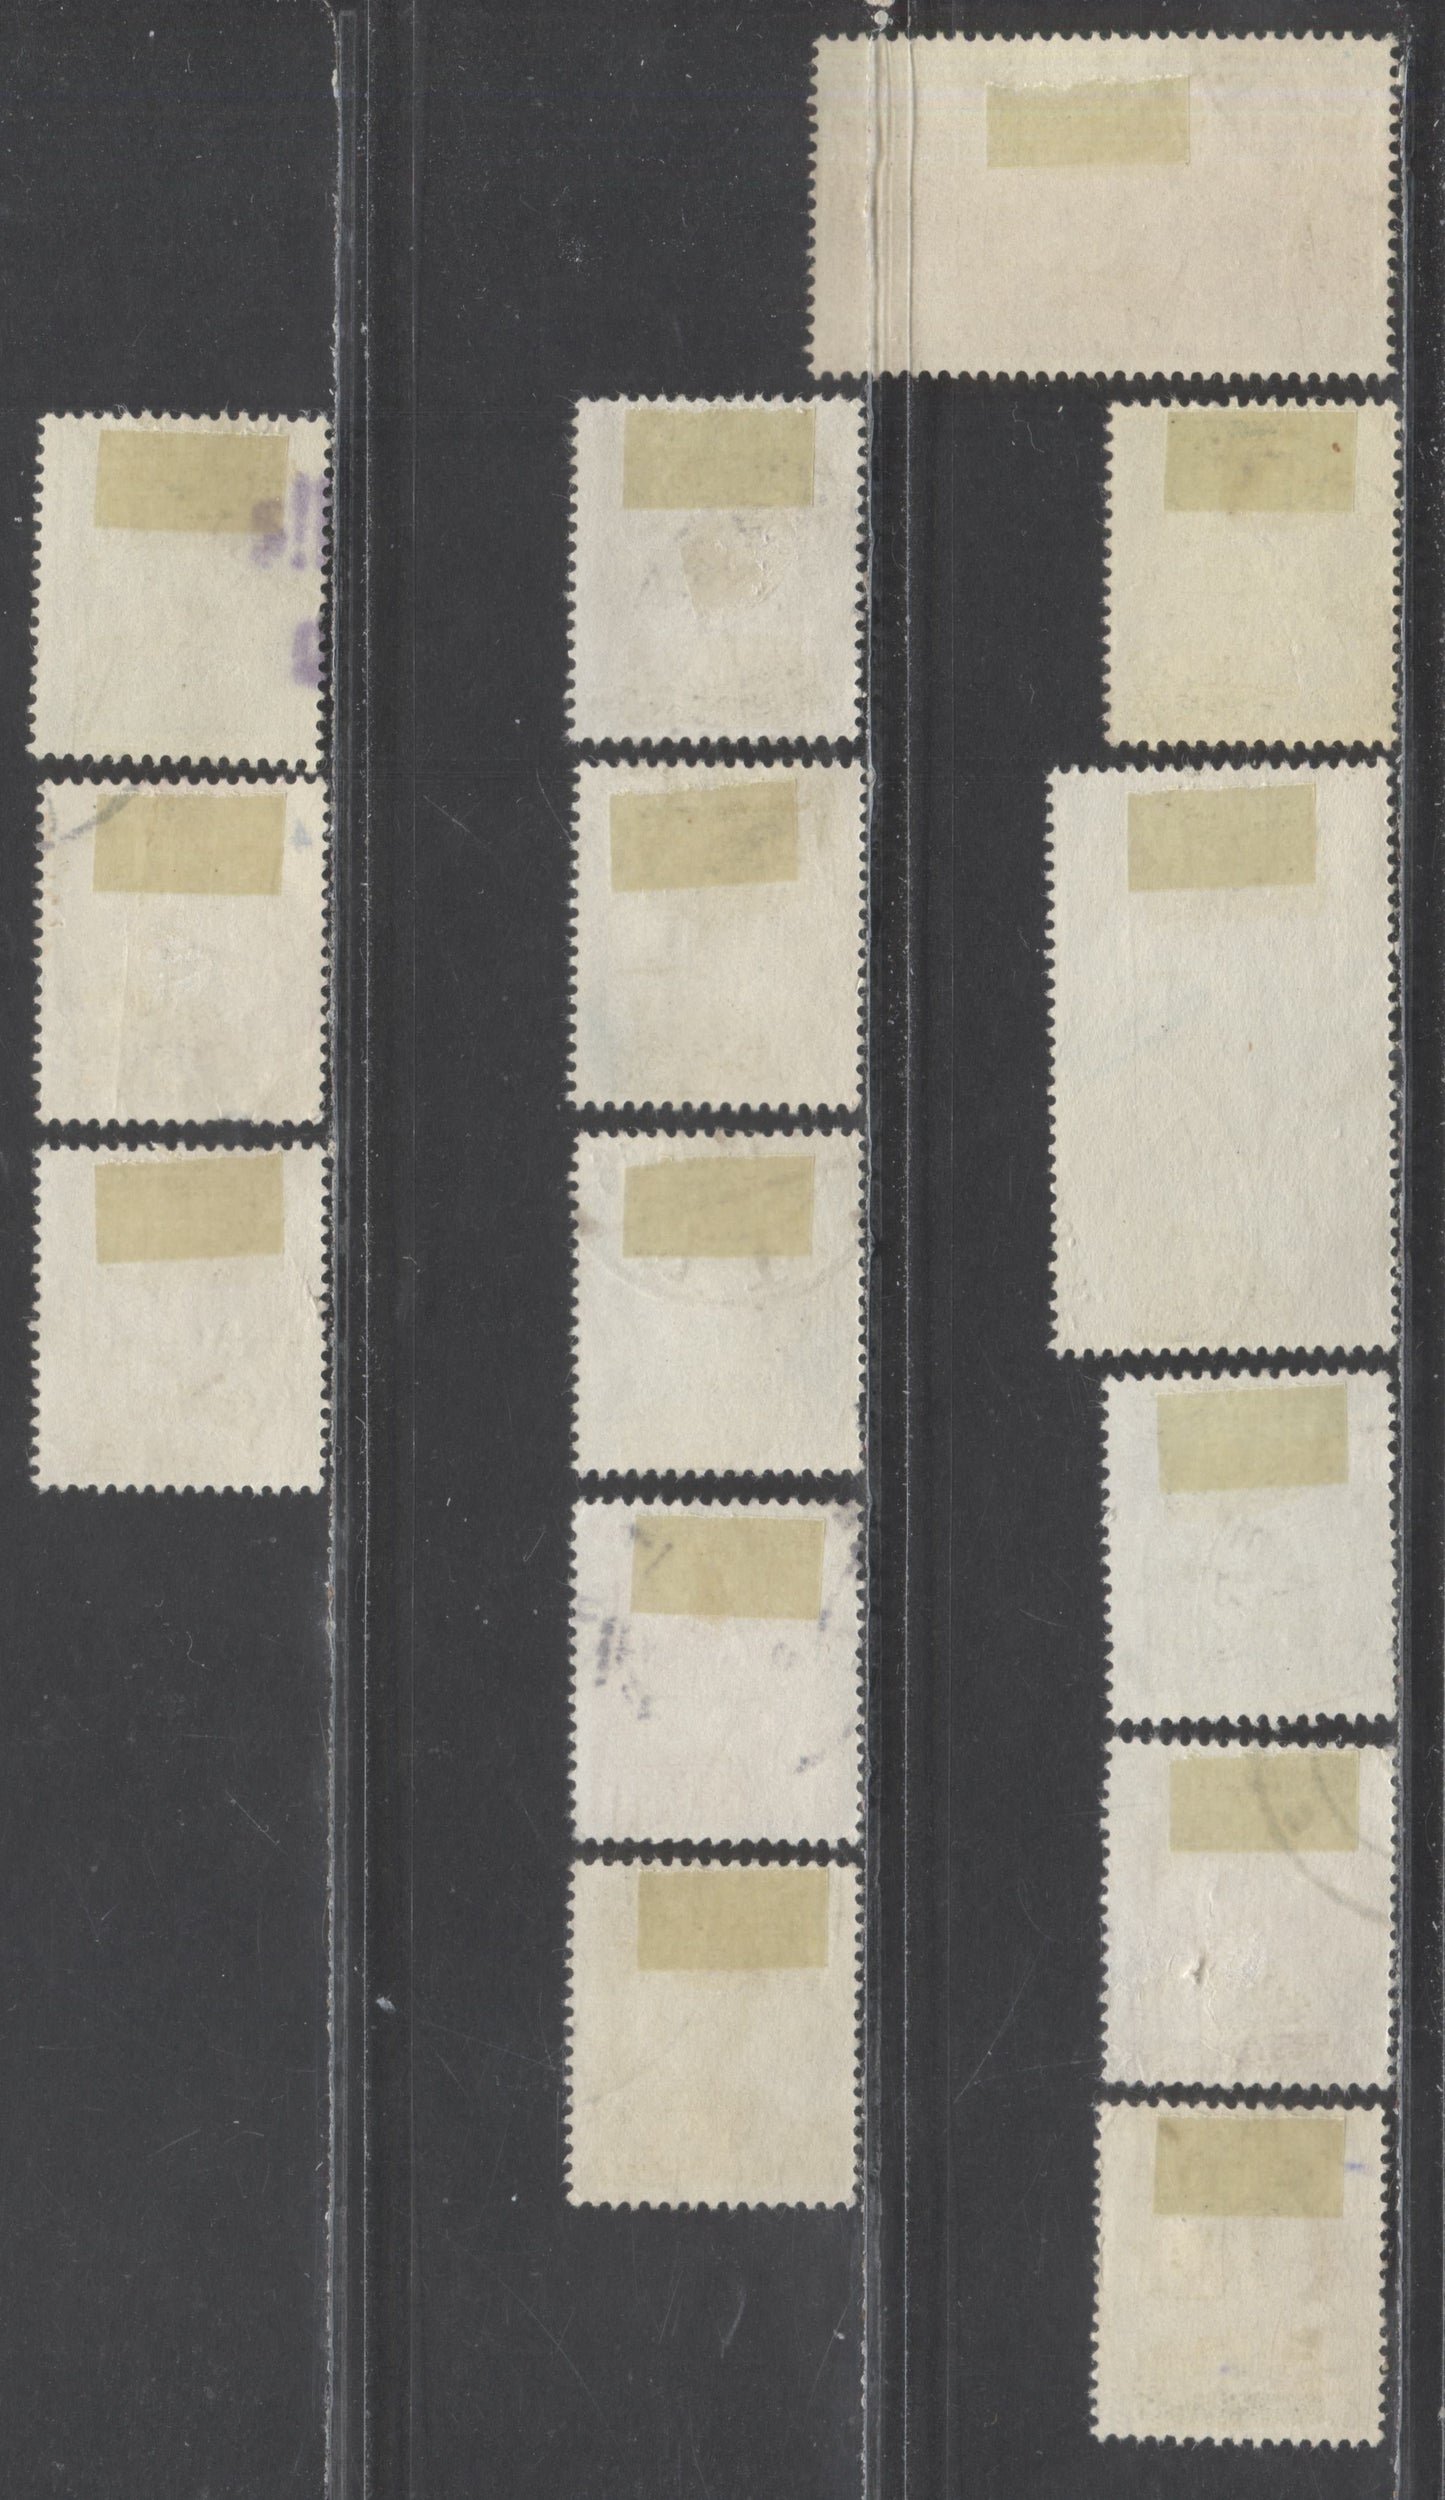 Lot 131A Germany - Rhineland - Pfalz SC#6N16/6N29 1948 Definitives, 14 Fine/Very Fine Used Singles, Click on Listing to See ALL Pictures, 2017 Scott Cat. $17.5 USD